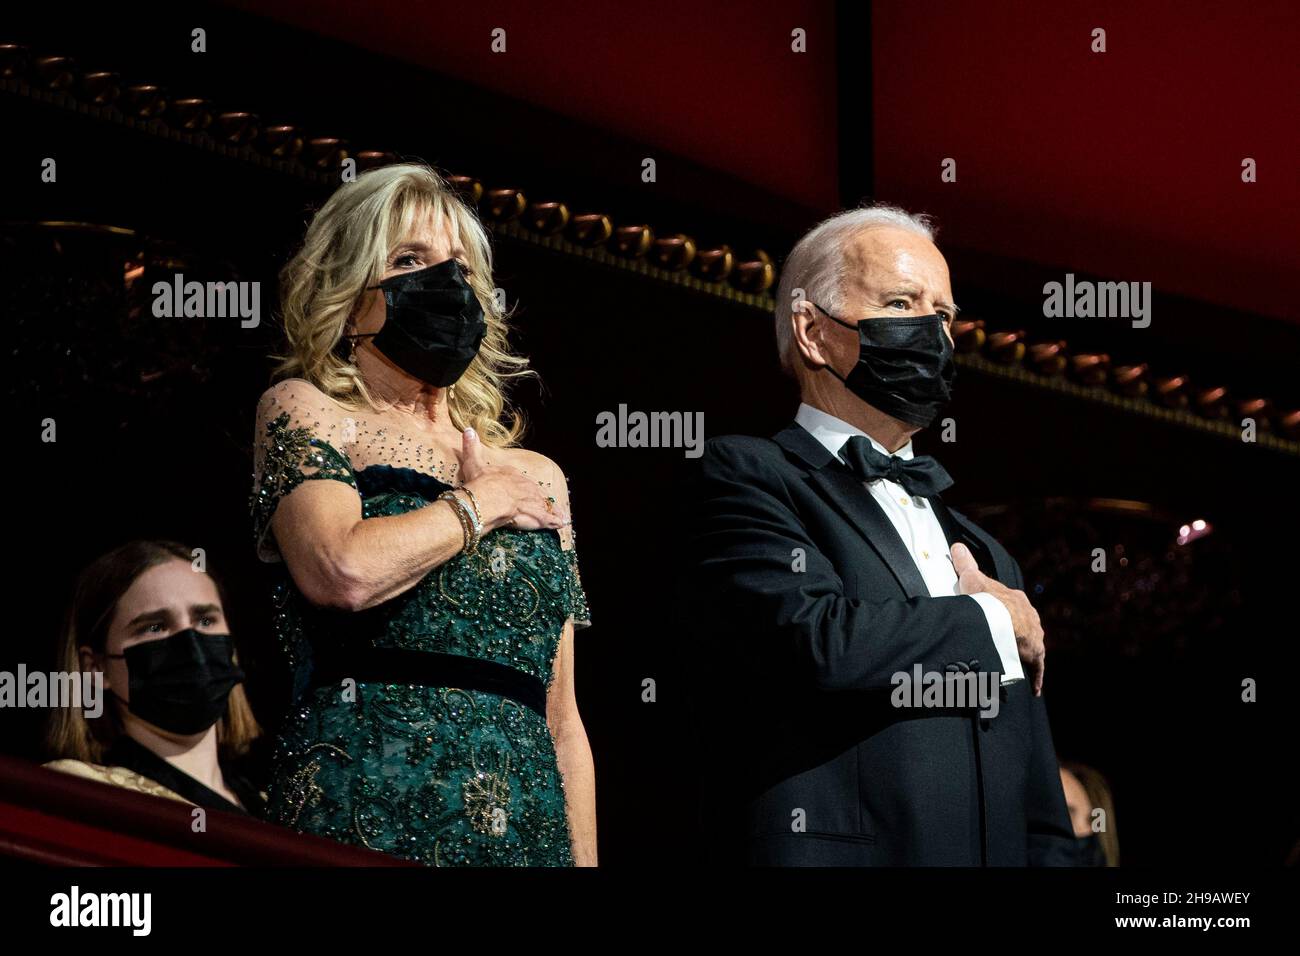 U.S. President Joe Biden and U.S. First Lady Jill Biden, stand for the National Anthem during the 44th Kennedy Center Honors at the John F. Kennedy Center for the Performing Arts in Washington, DC, U.S., on Sunday, Dec. 5, 2021. The 44th Honorees for lifetime artistic achievements include operatic bass-baritone Justino Diaz, Motown founder Berry Gordy, Saturday Night Live creator Lorne Michaels, actress Bette Midler, and singer-songwriter Joni Mitchell. Credit: Al Drago/Pool via CNP /MediaPunch Stock Photo